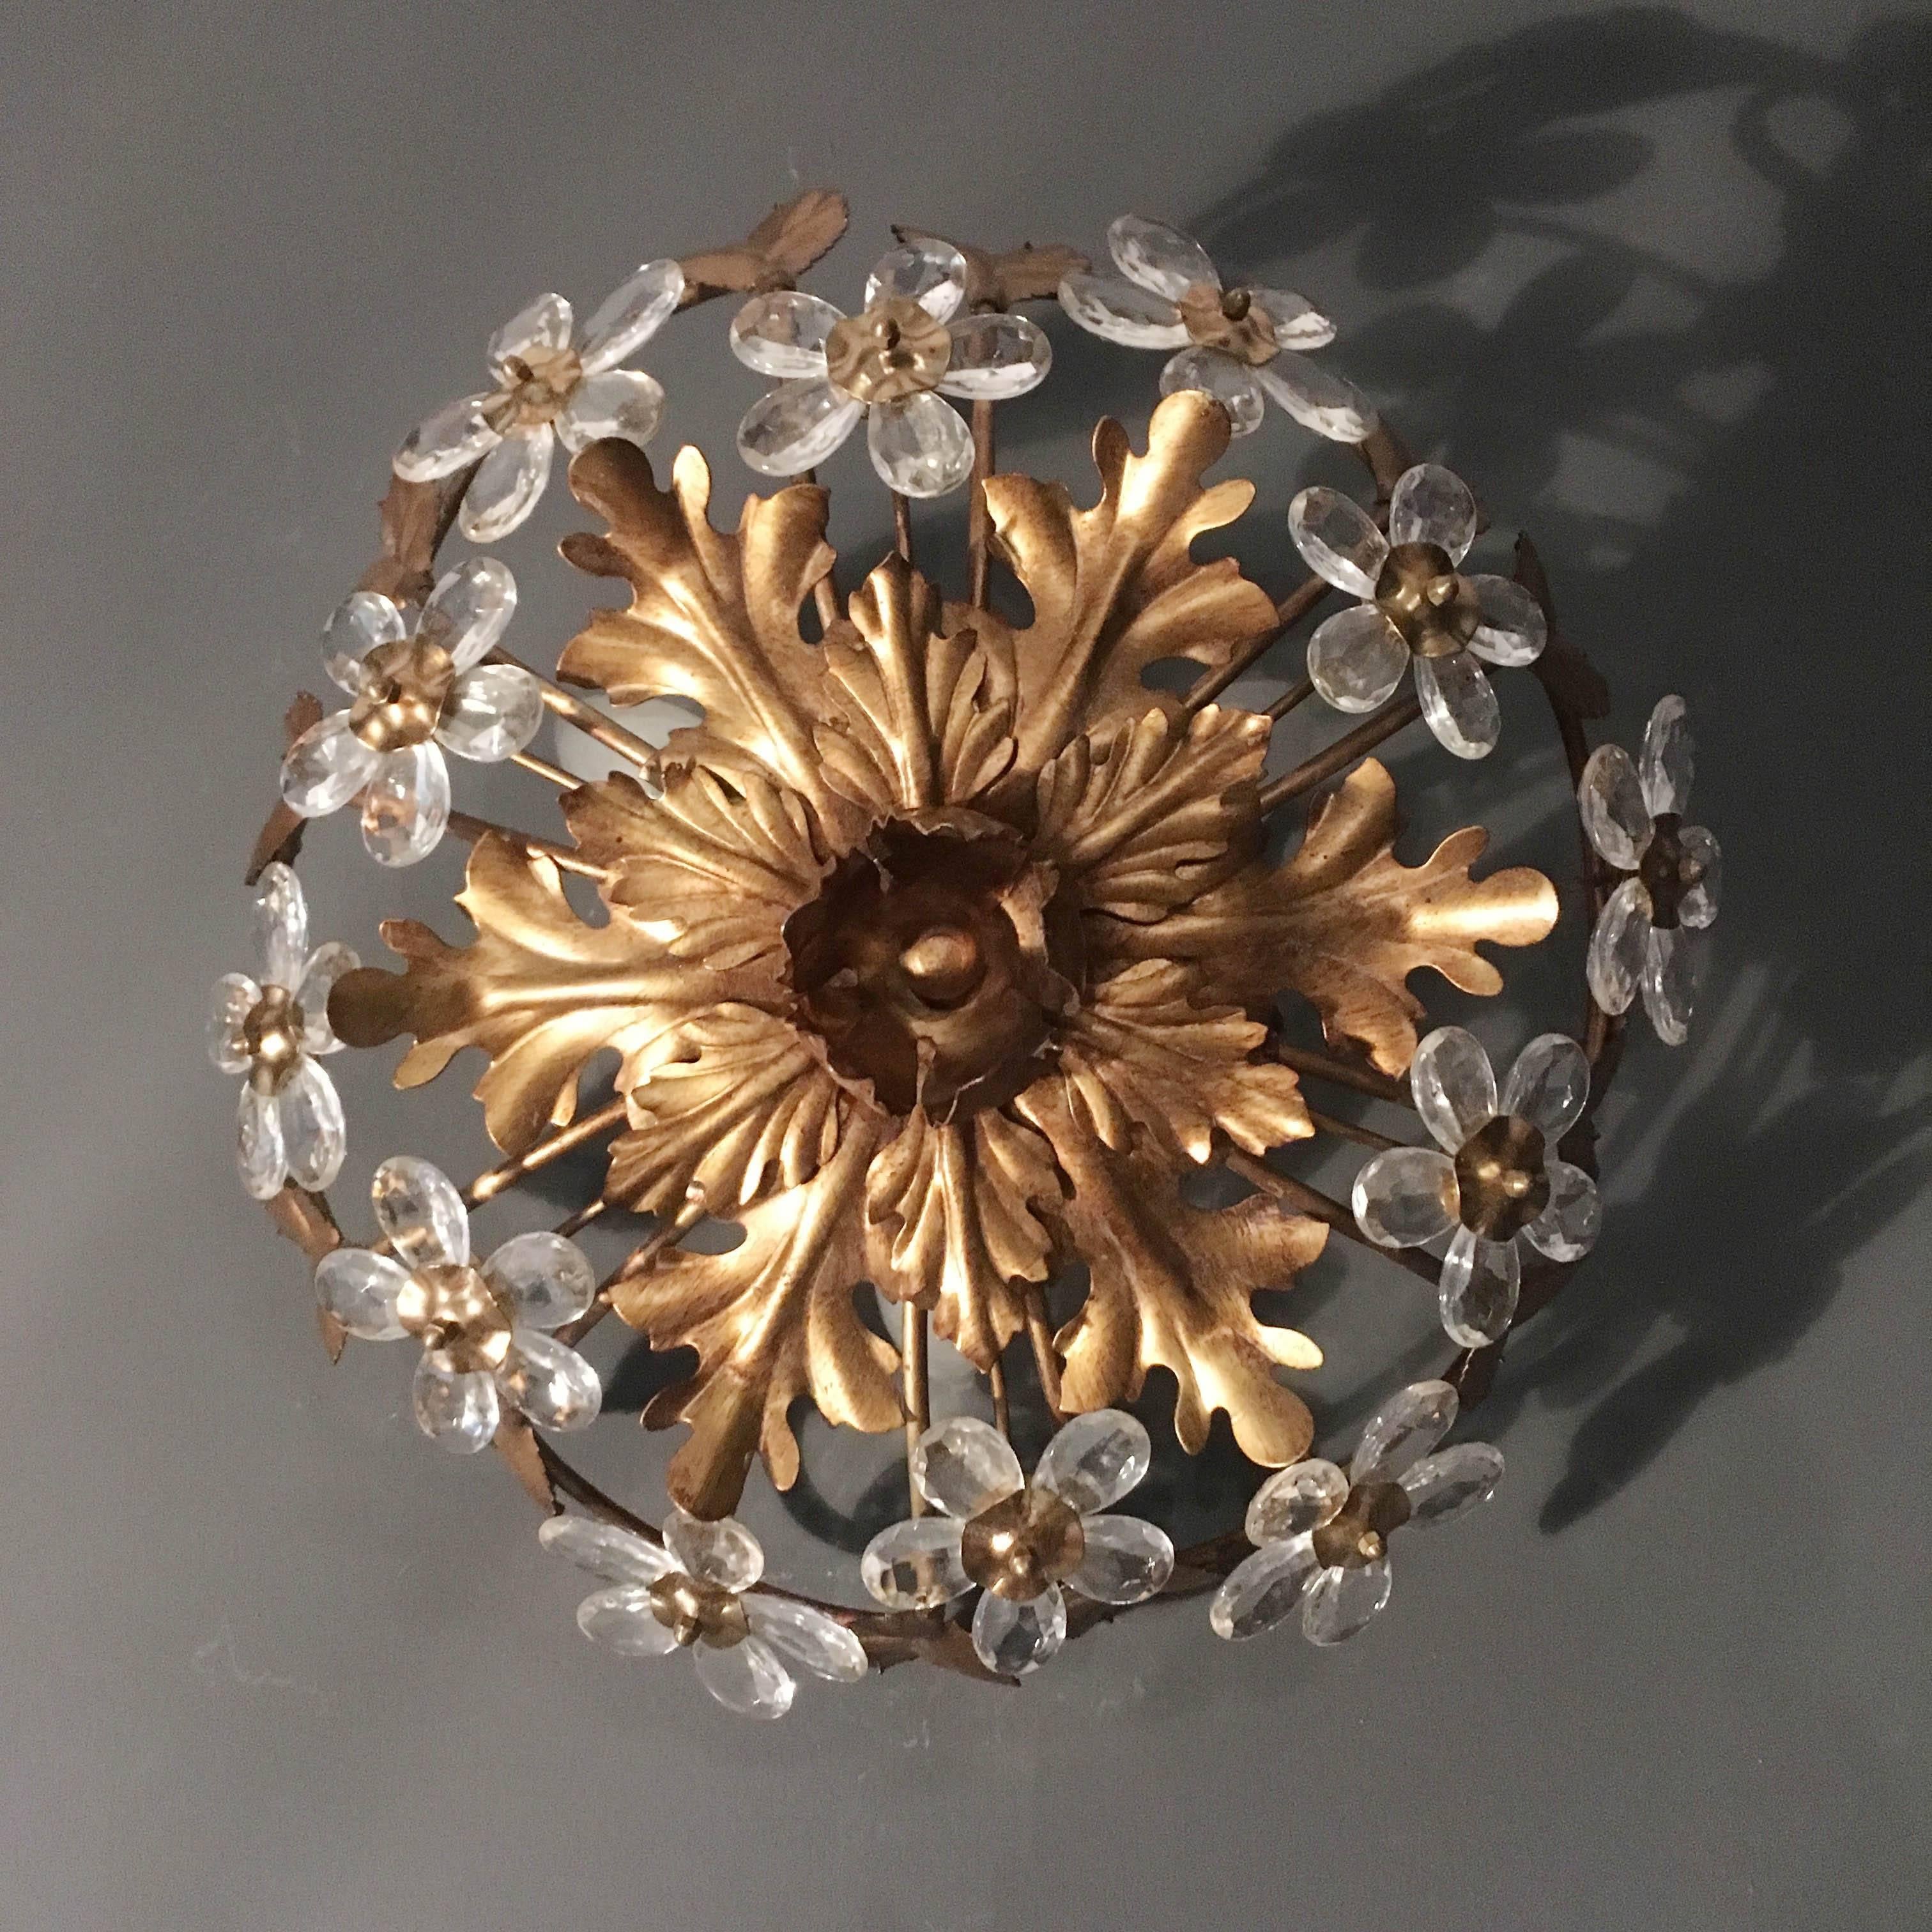 Florentine glass flower flush ceiling light

Stunning leaf and flower design ceiling light, brass colored metal leaves interspersed clear cut-glass flowers.

The light has three bulb holders, these take standard size screw in bulbs

The light